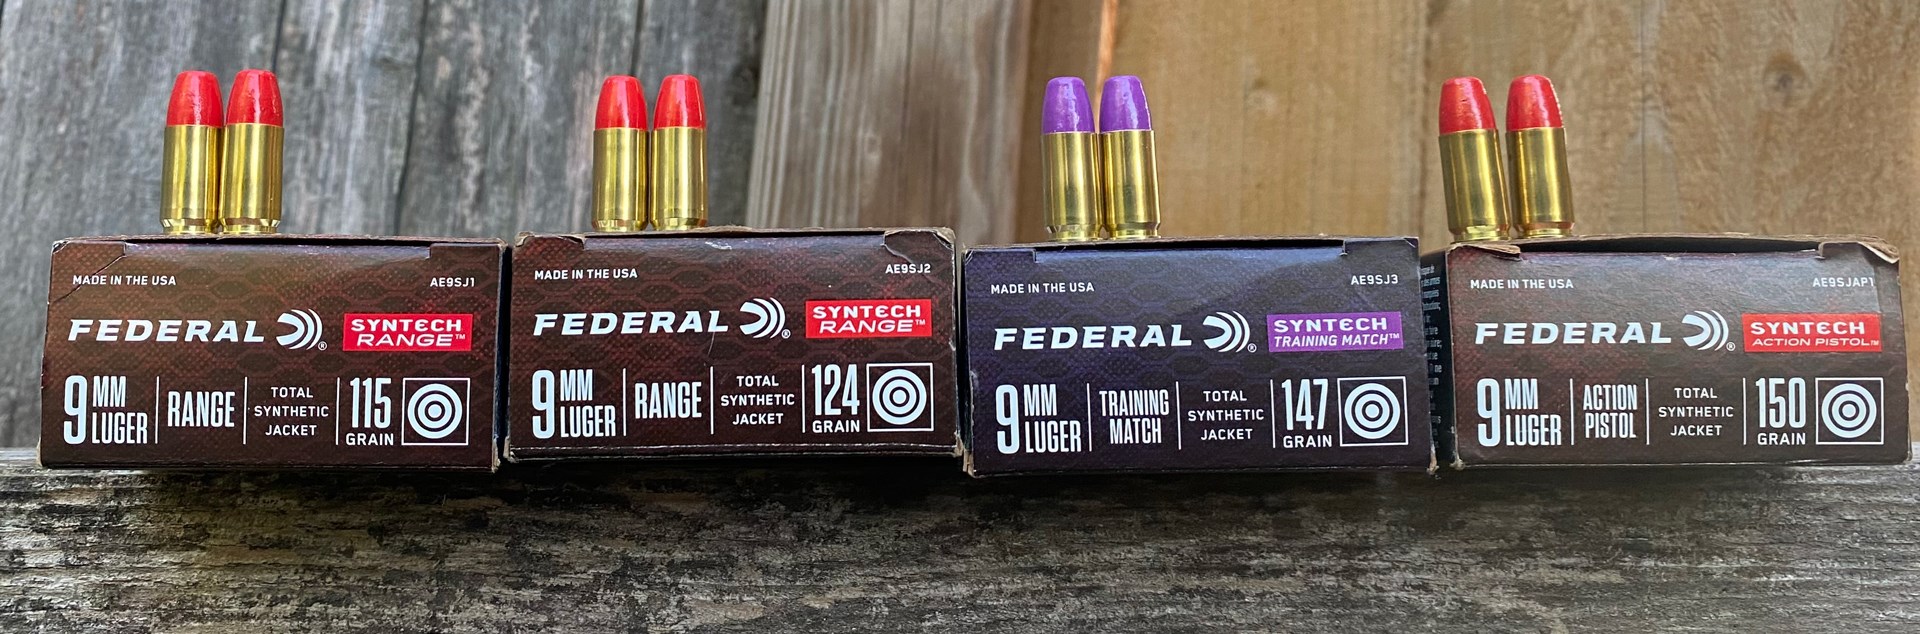 Four boxes of Federal Syntech ammunition with bullets and wood background